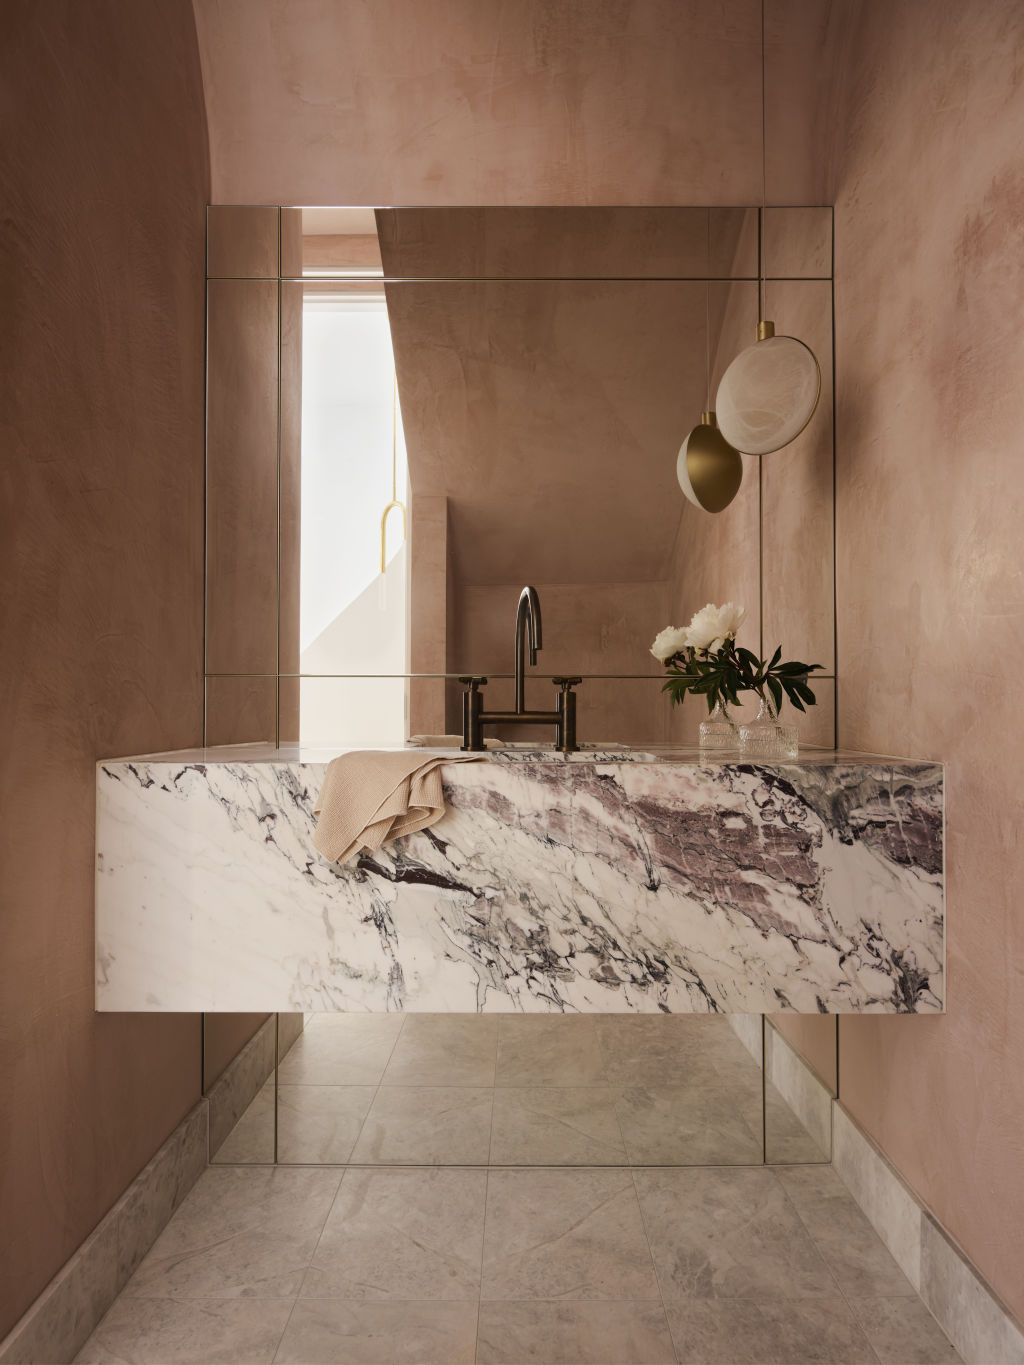 'Play with material with different effects like translucency, softness and reflectivity,' designer Shona McElroy suggests. Photo: Supplied